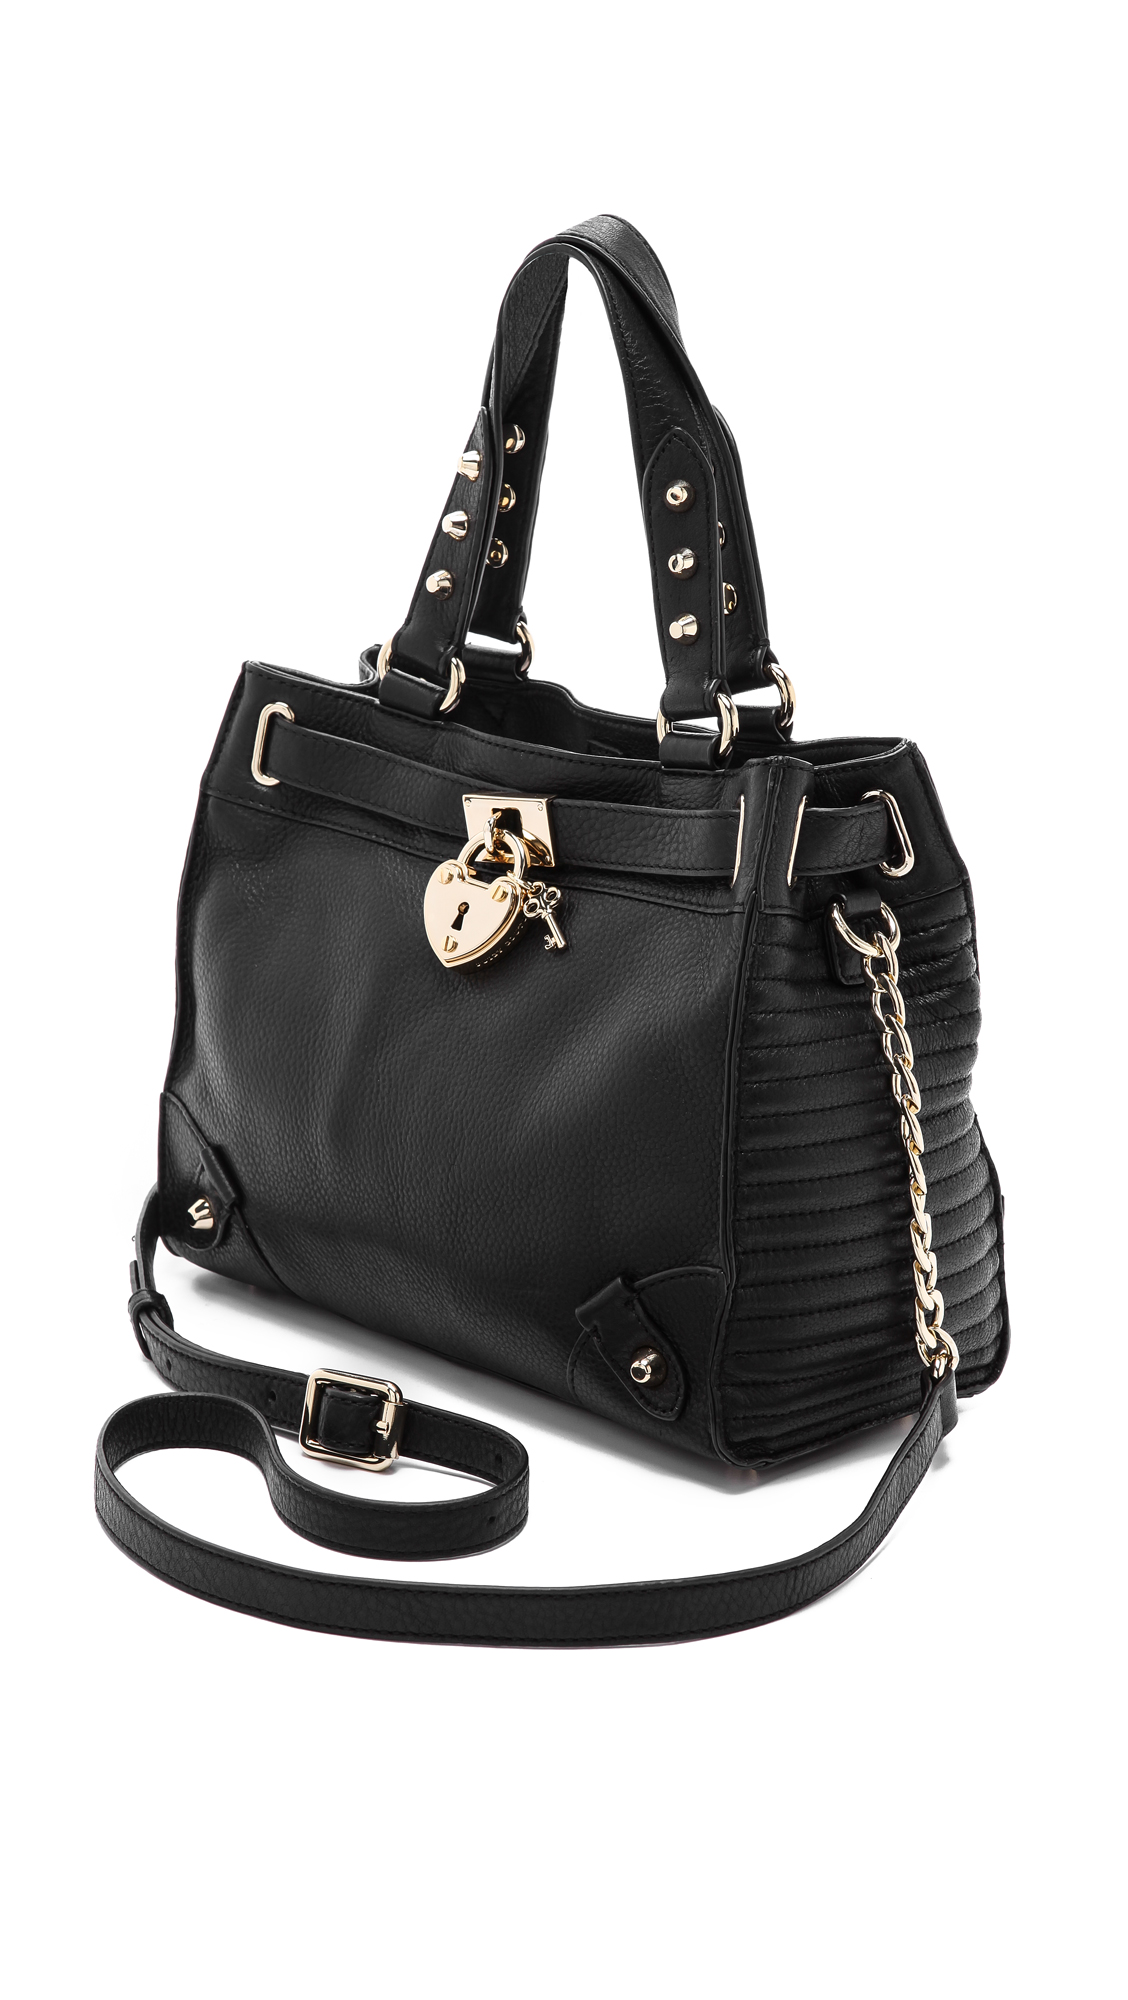 Lyst - Juicy Couture Robertson Mini Daydreamer Bag in Black